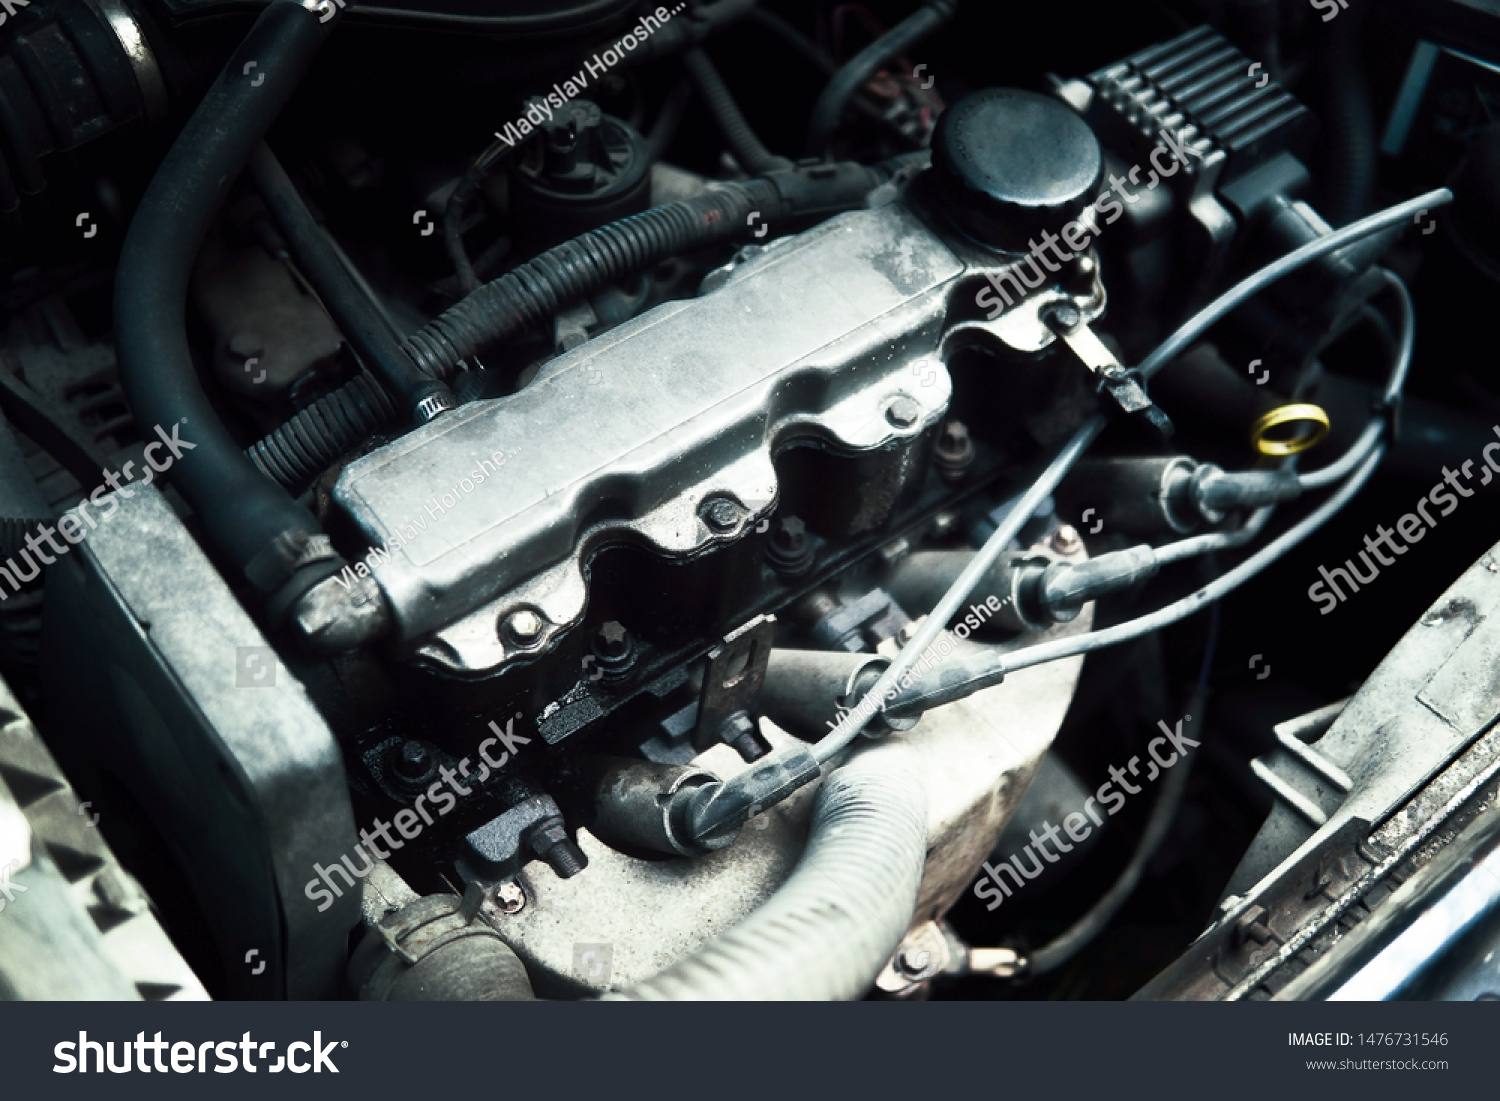 Check the status of the car engine. #1476731546